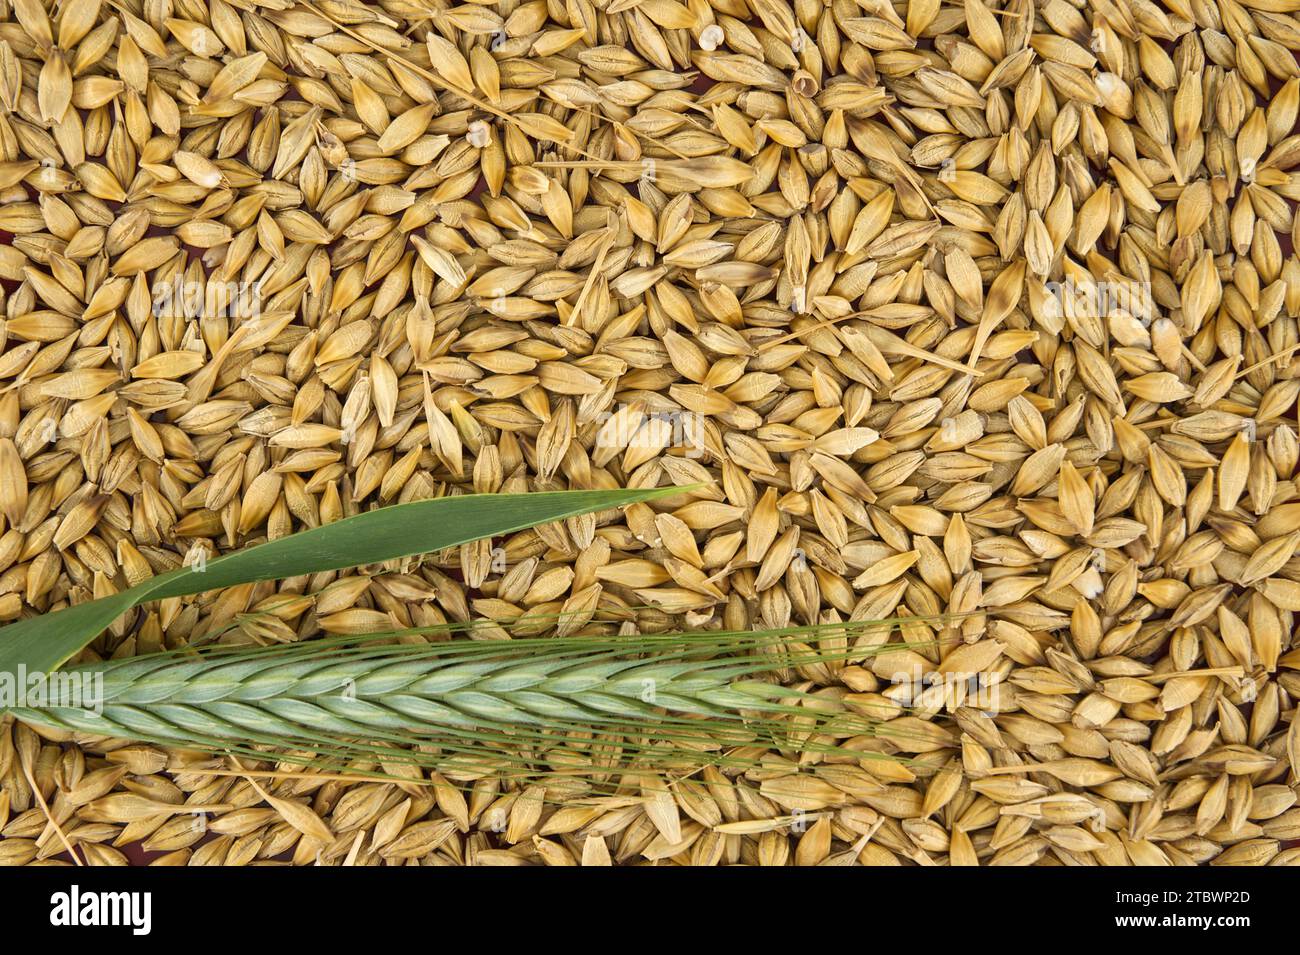 Barley (Hordeum vulgare) seeds with the outer husk and barley ears, background and surface of barley grains Stock Photo